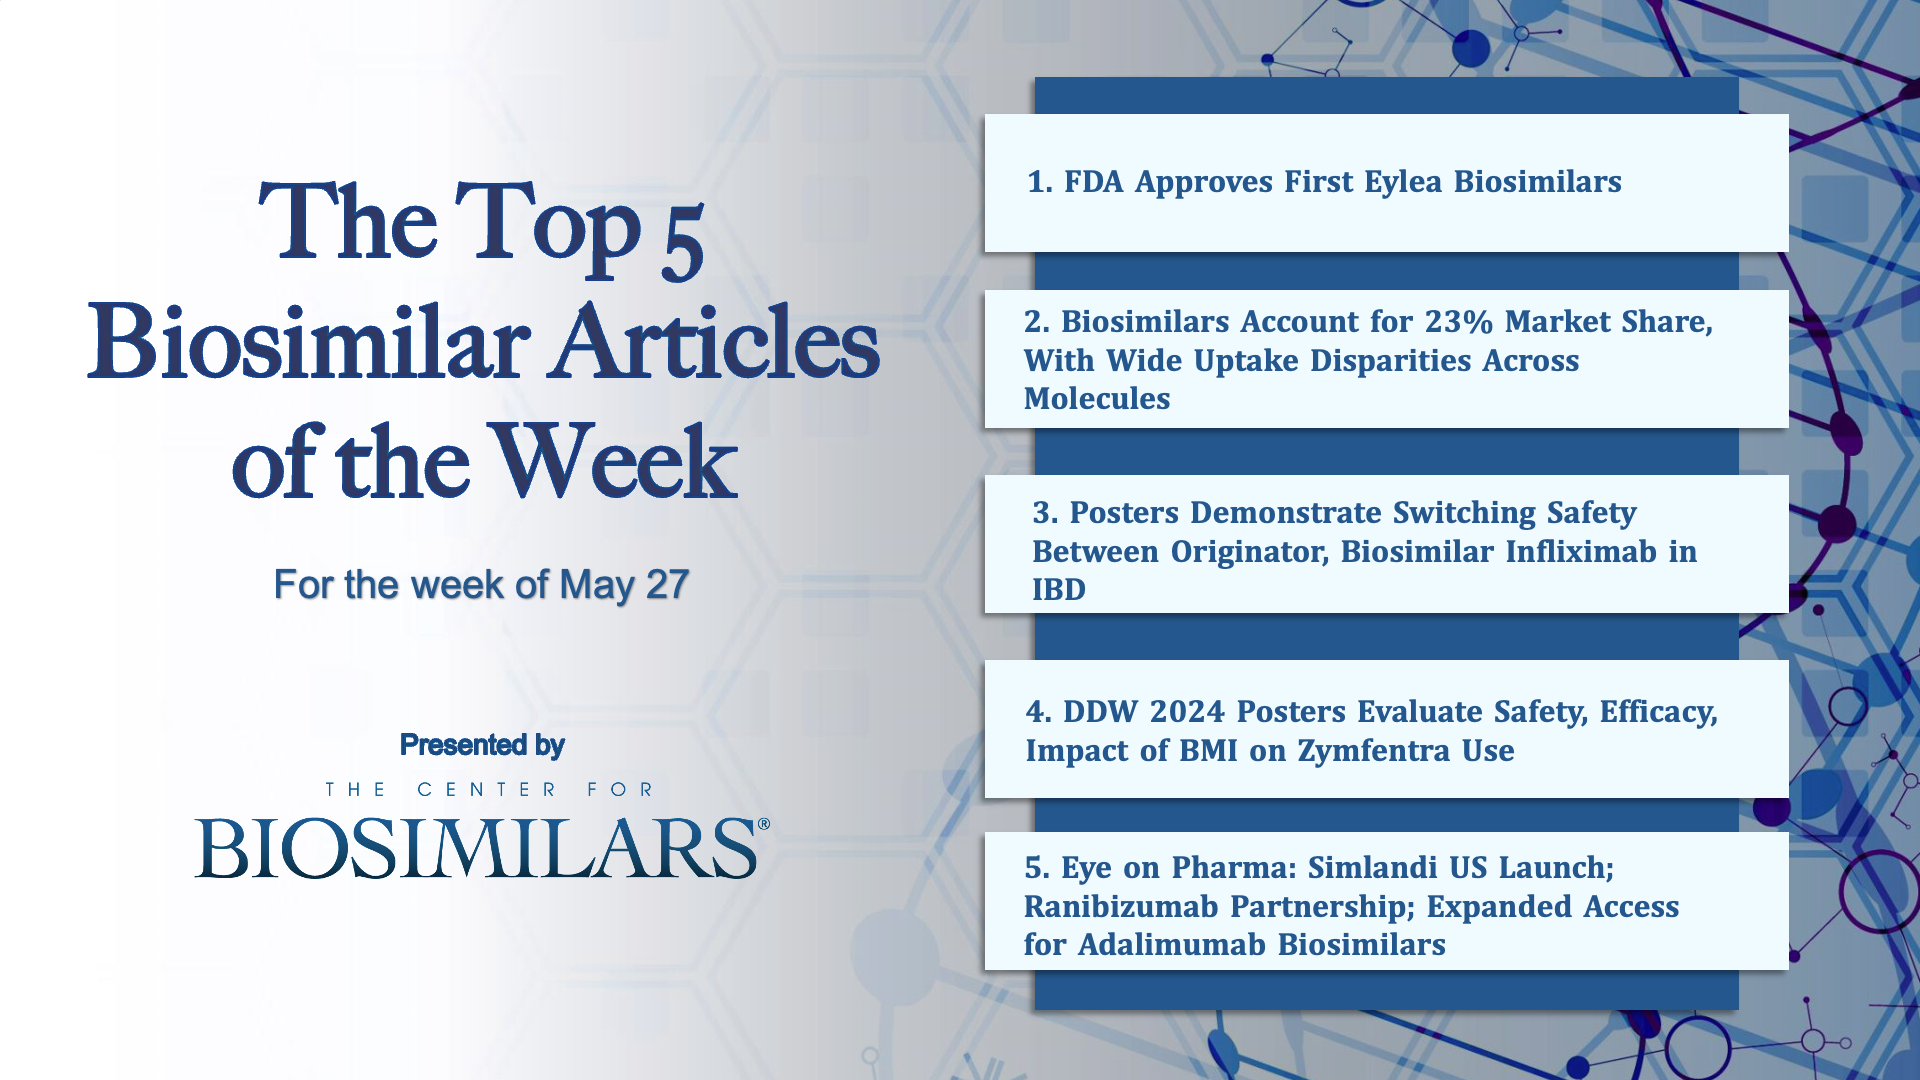 Here are the top 5 biosimilar articles for the week of May 27, 2024.